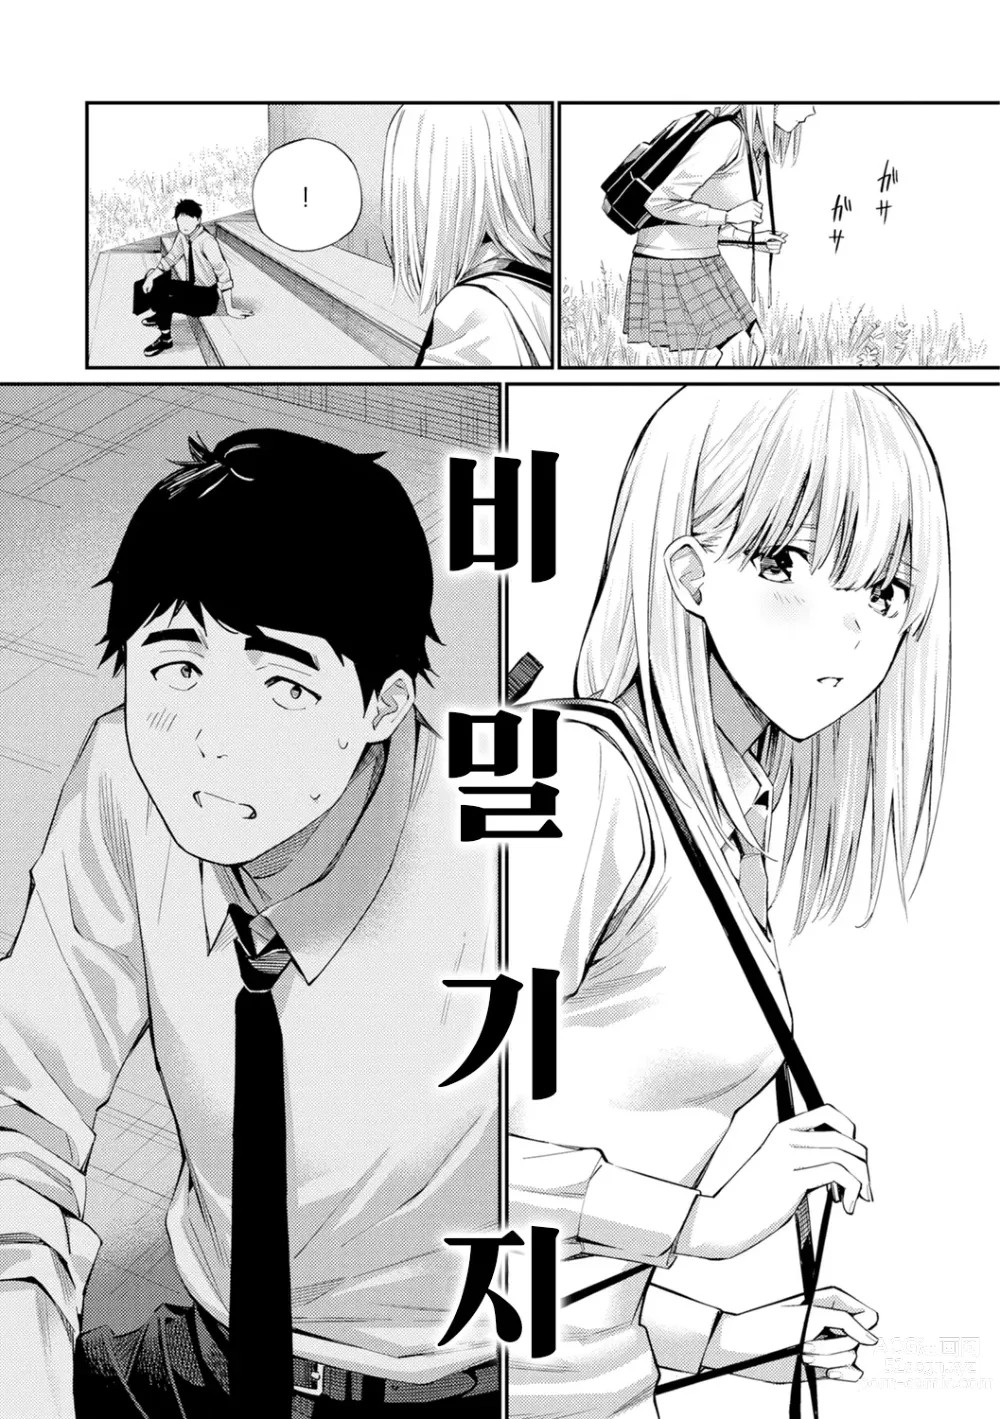 Page 7 of manga 비밀이에요. - Between You&ME